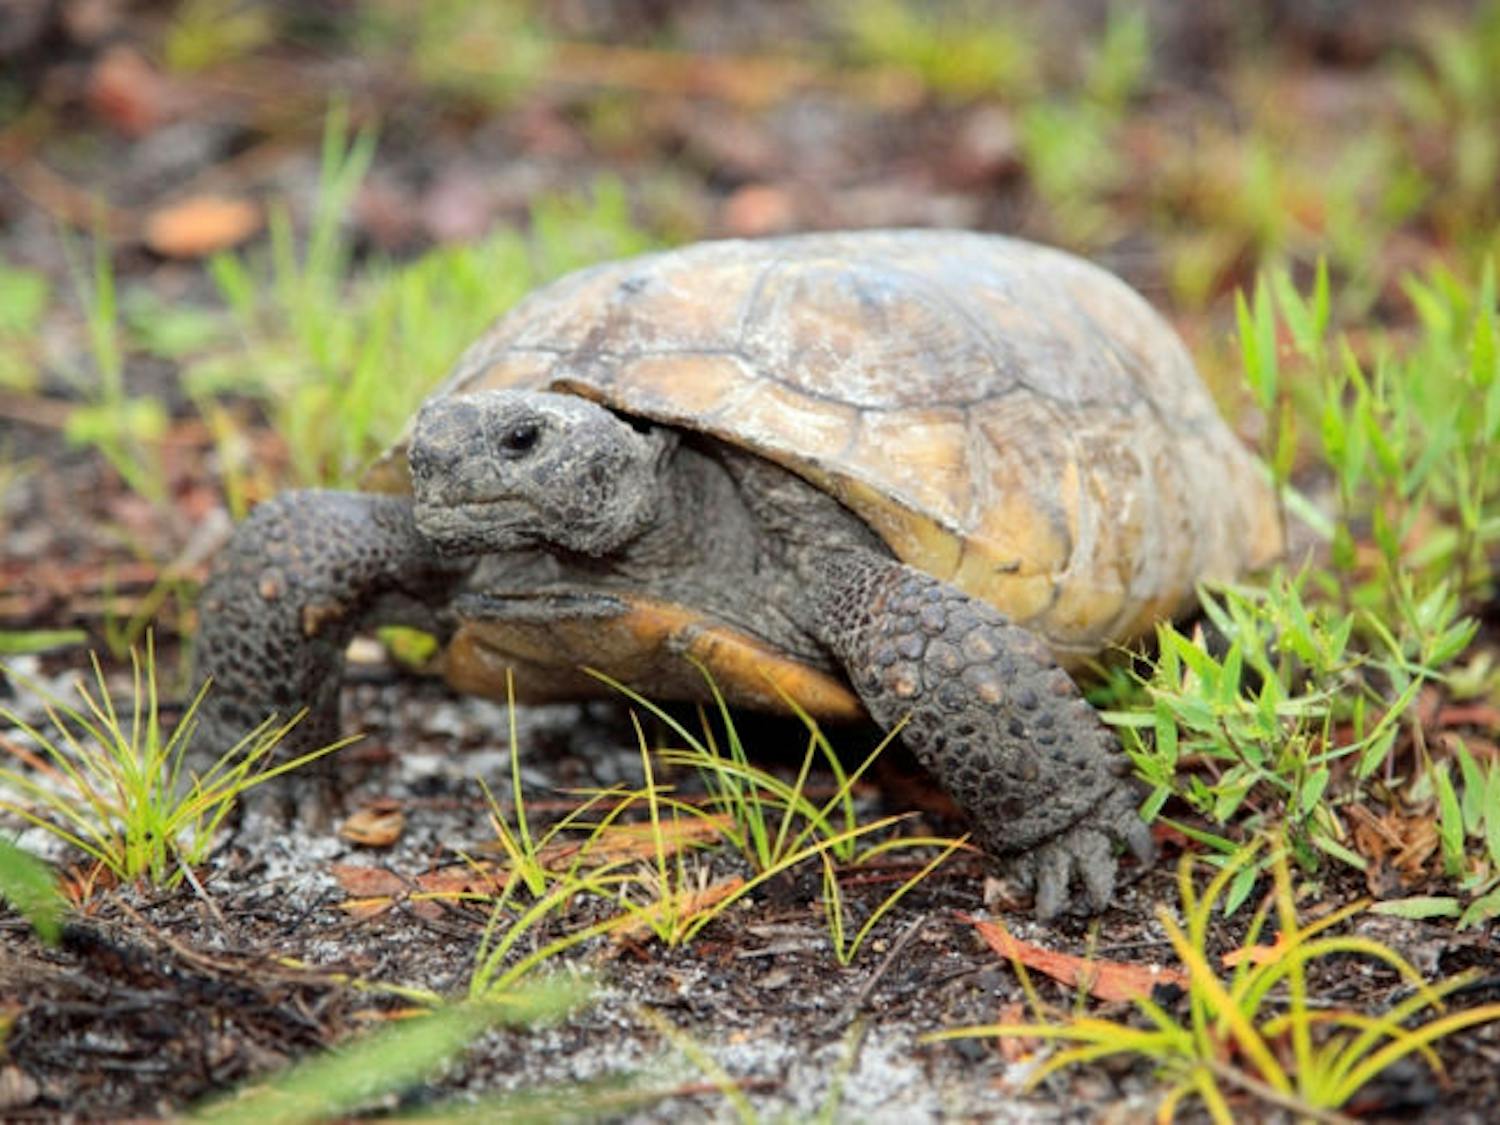 In this photo from the Florida Fish and Wildlife Conservation Commission, a gopher tortoise moves through freshly sprouted vegetation following a prescribed burn.